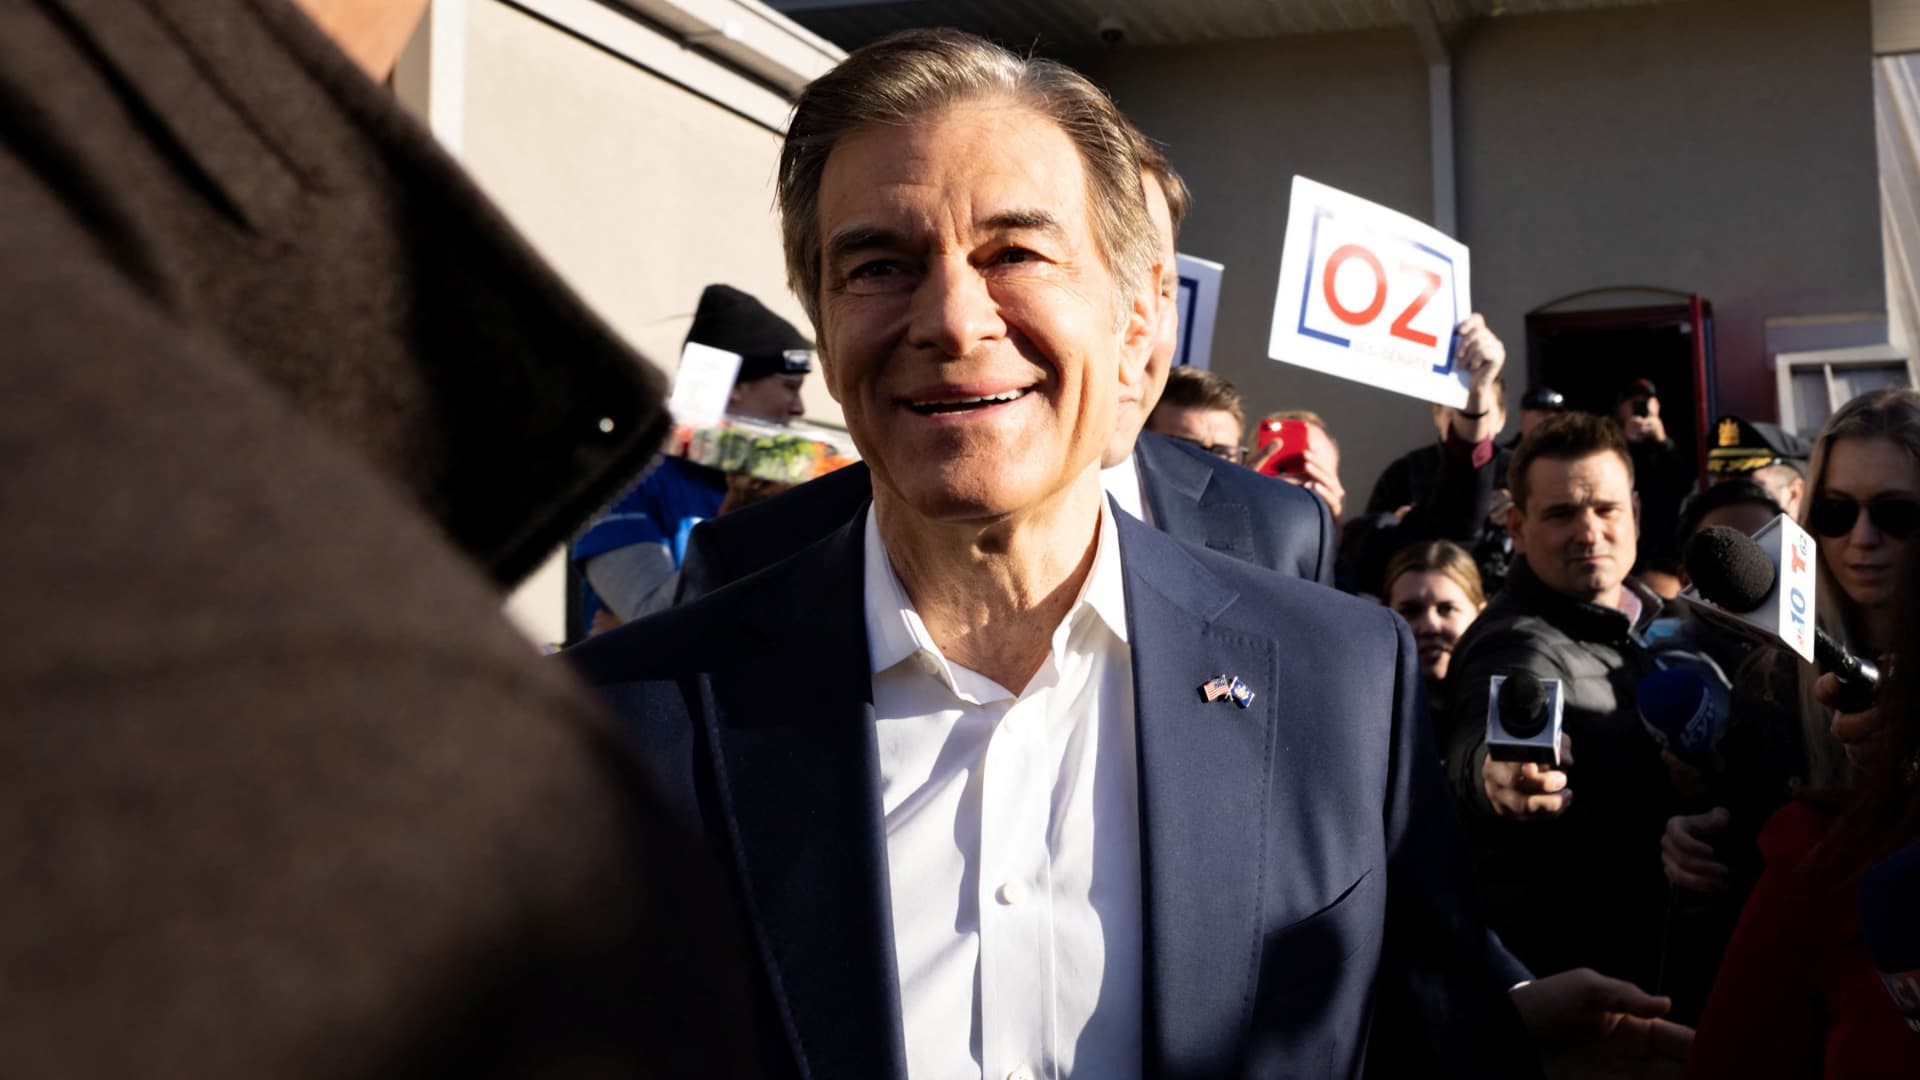 Republican Senate candidate Dr. Mehmet Oz departs from his polling location after voting in the 2022 U.S. midterm election in Bryn Athyn, Pennsylvania, U.S., November 8, 2022. 